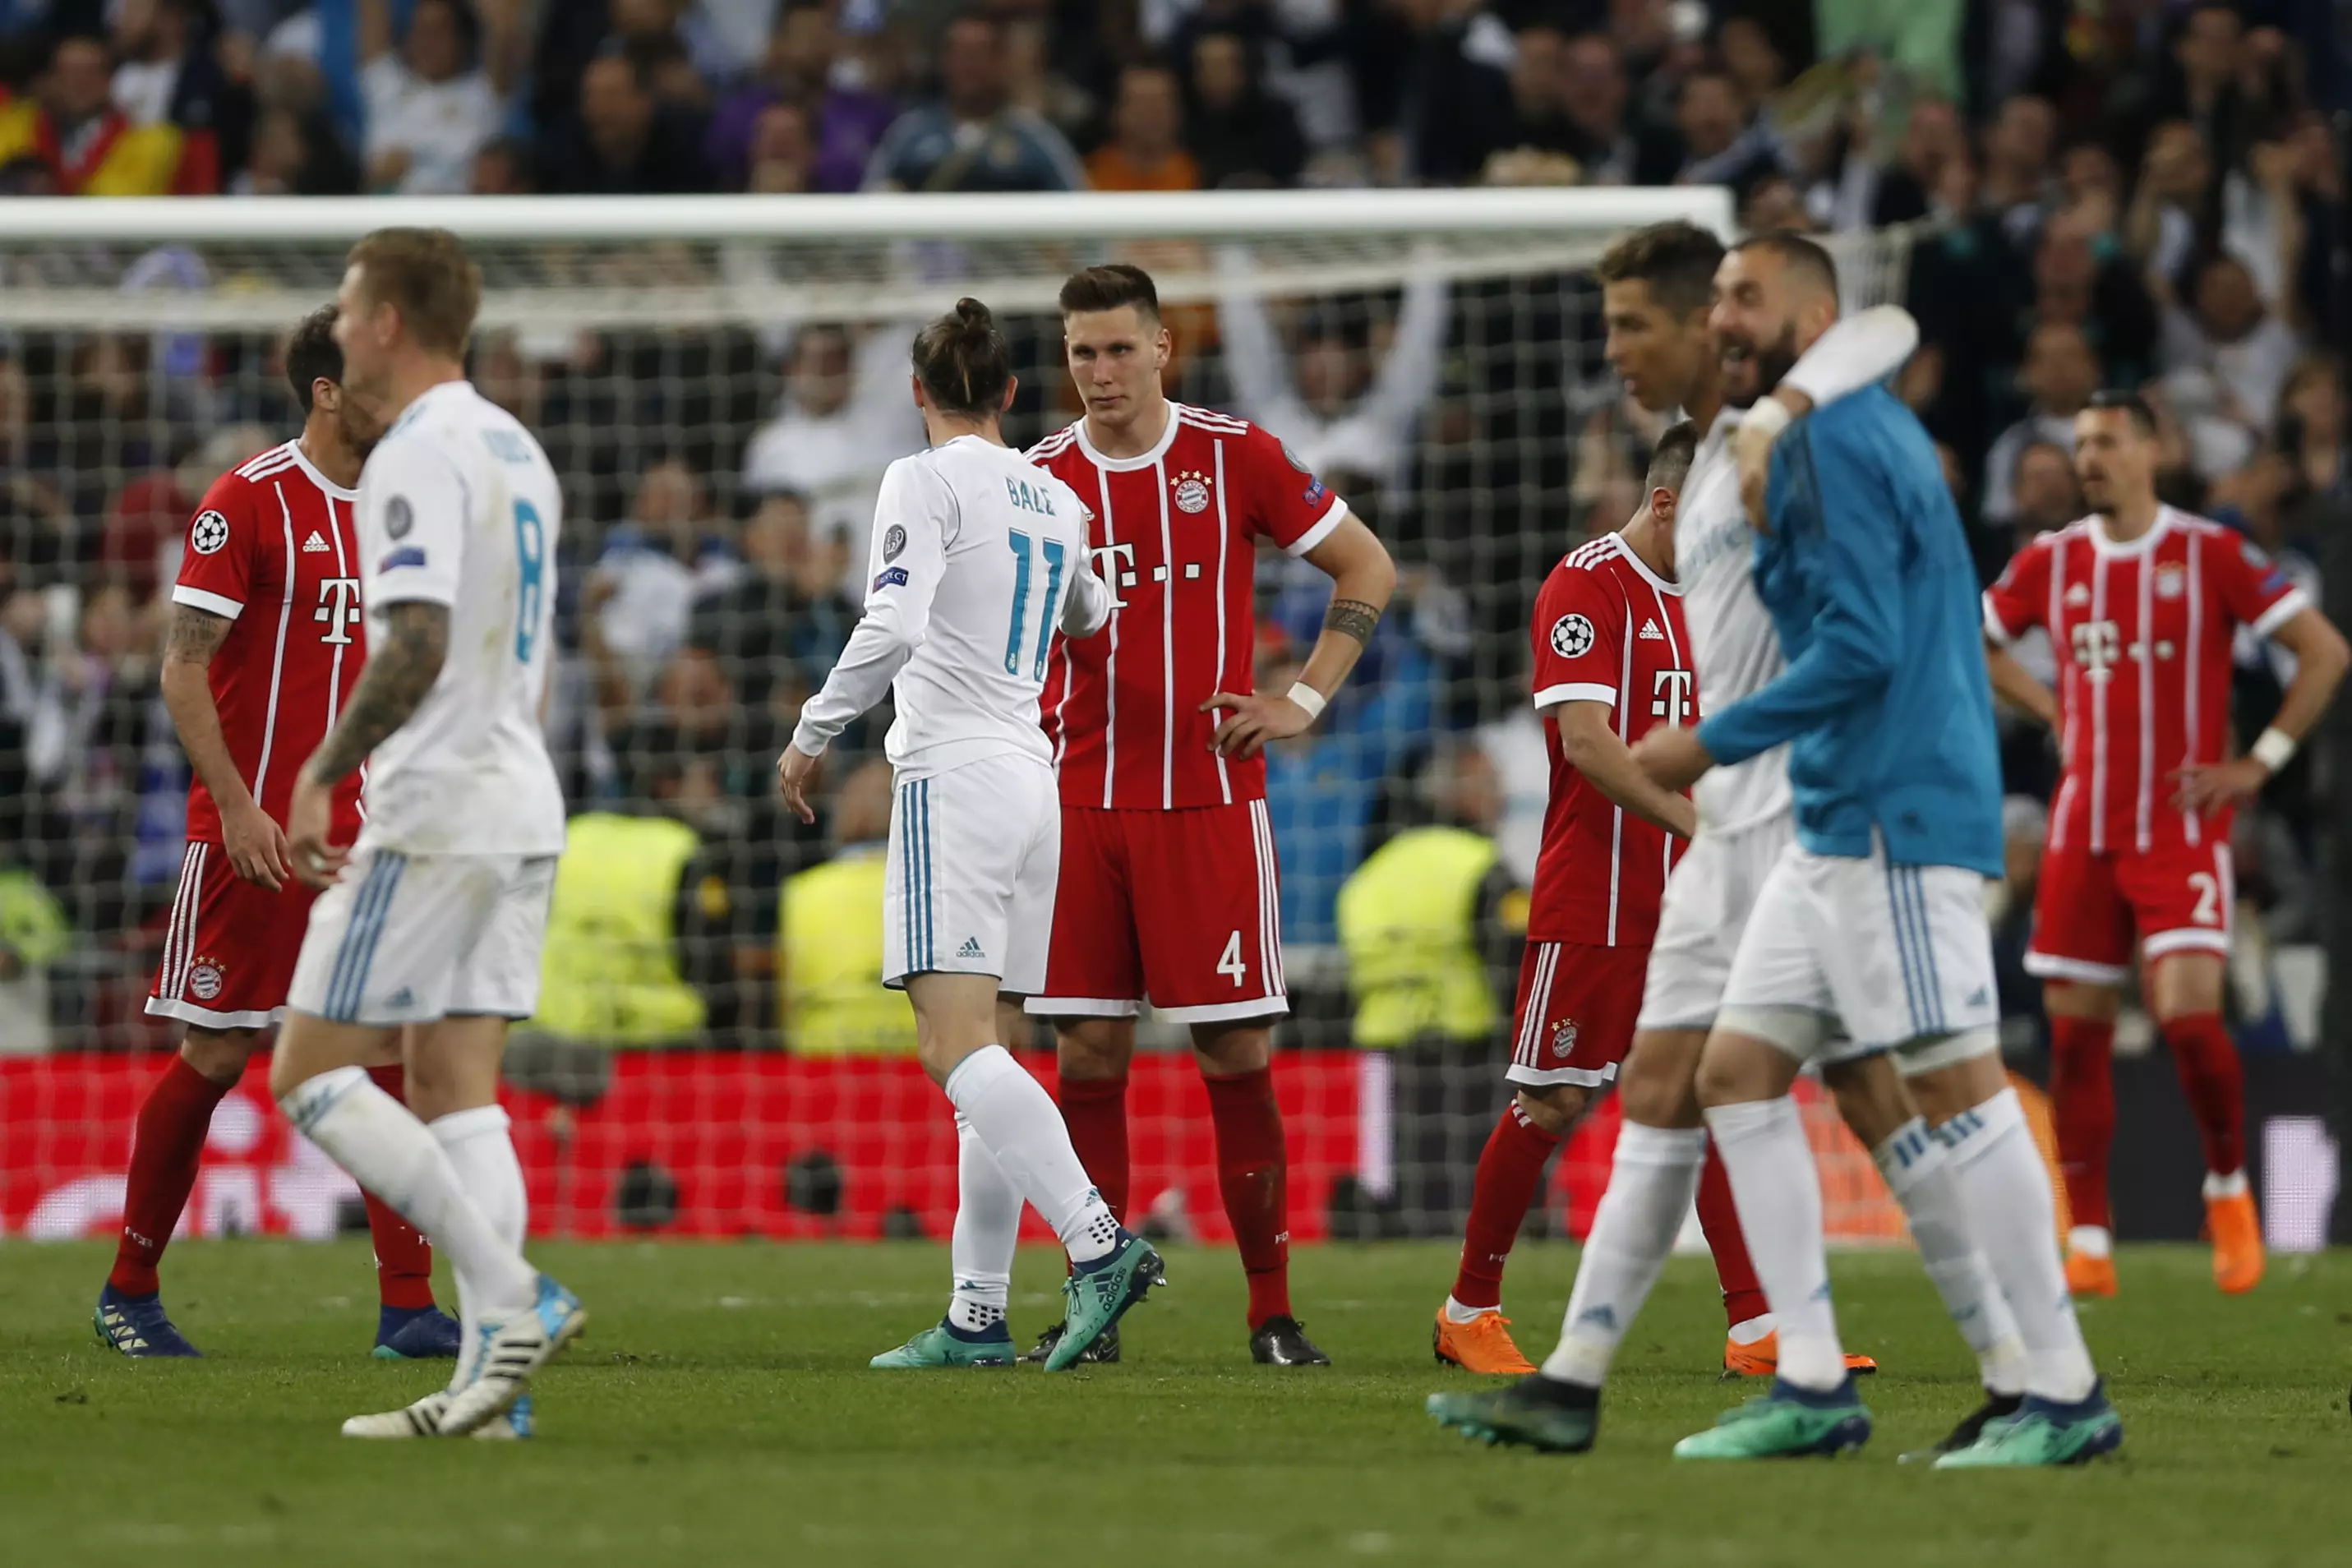 Bayern and Real faced in this season's Champions League. Image: PA Images